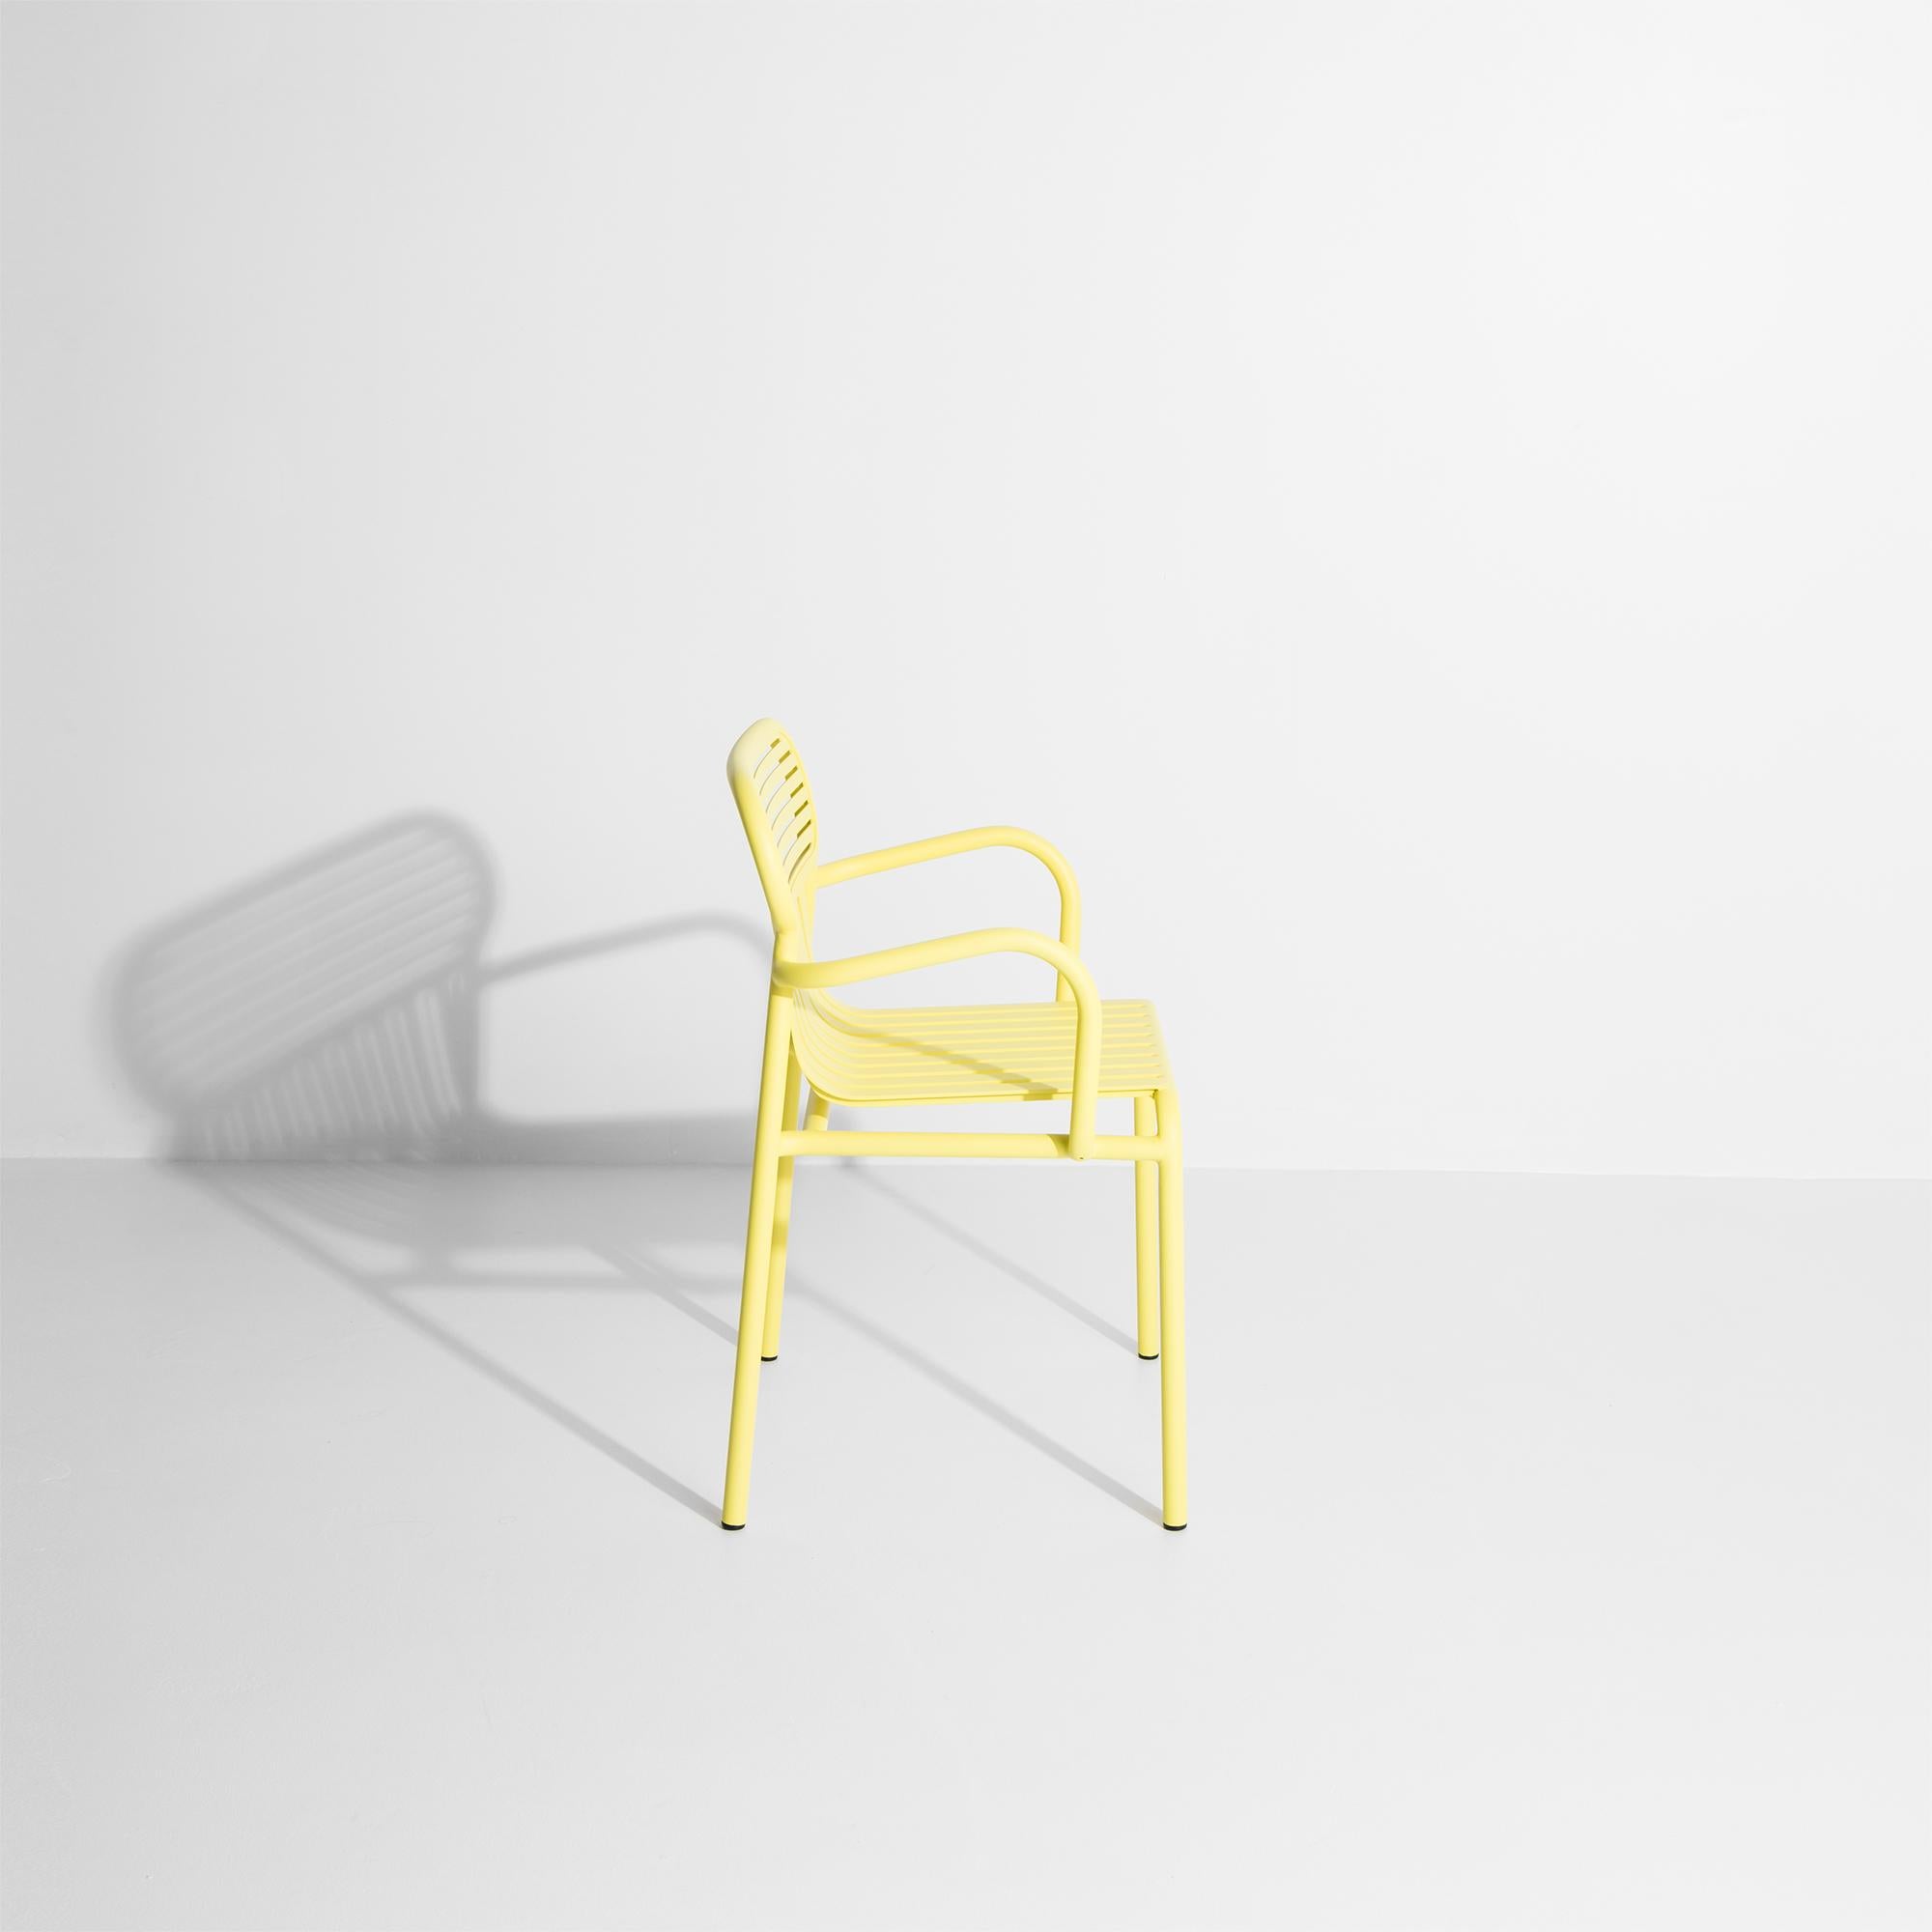 Chinese Petite Friture Week-End Bridge Chair in Yellow Aluminium, 2017 For Sale